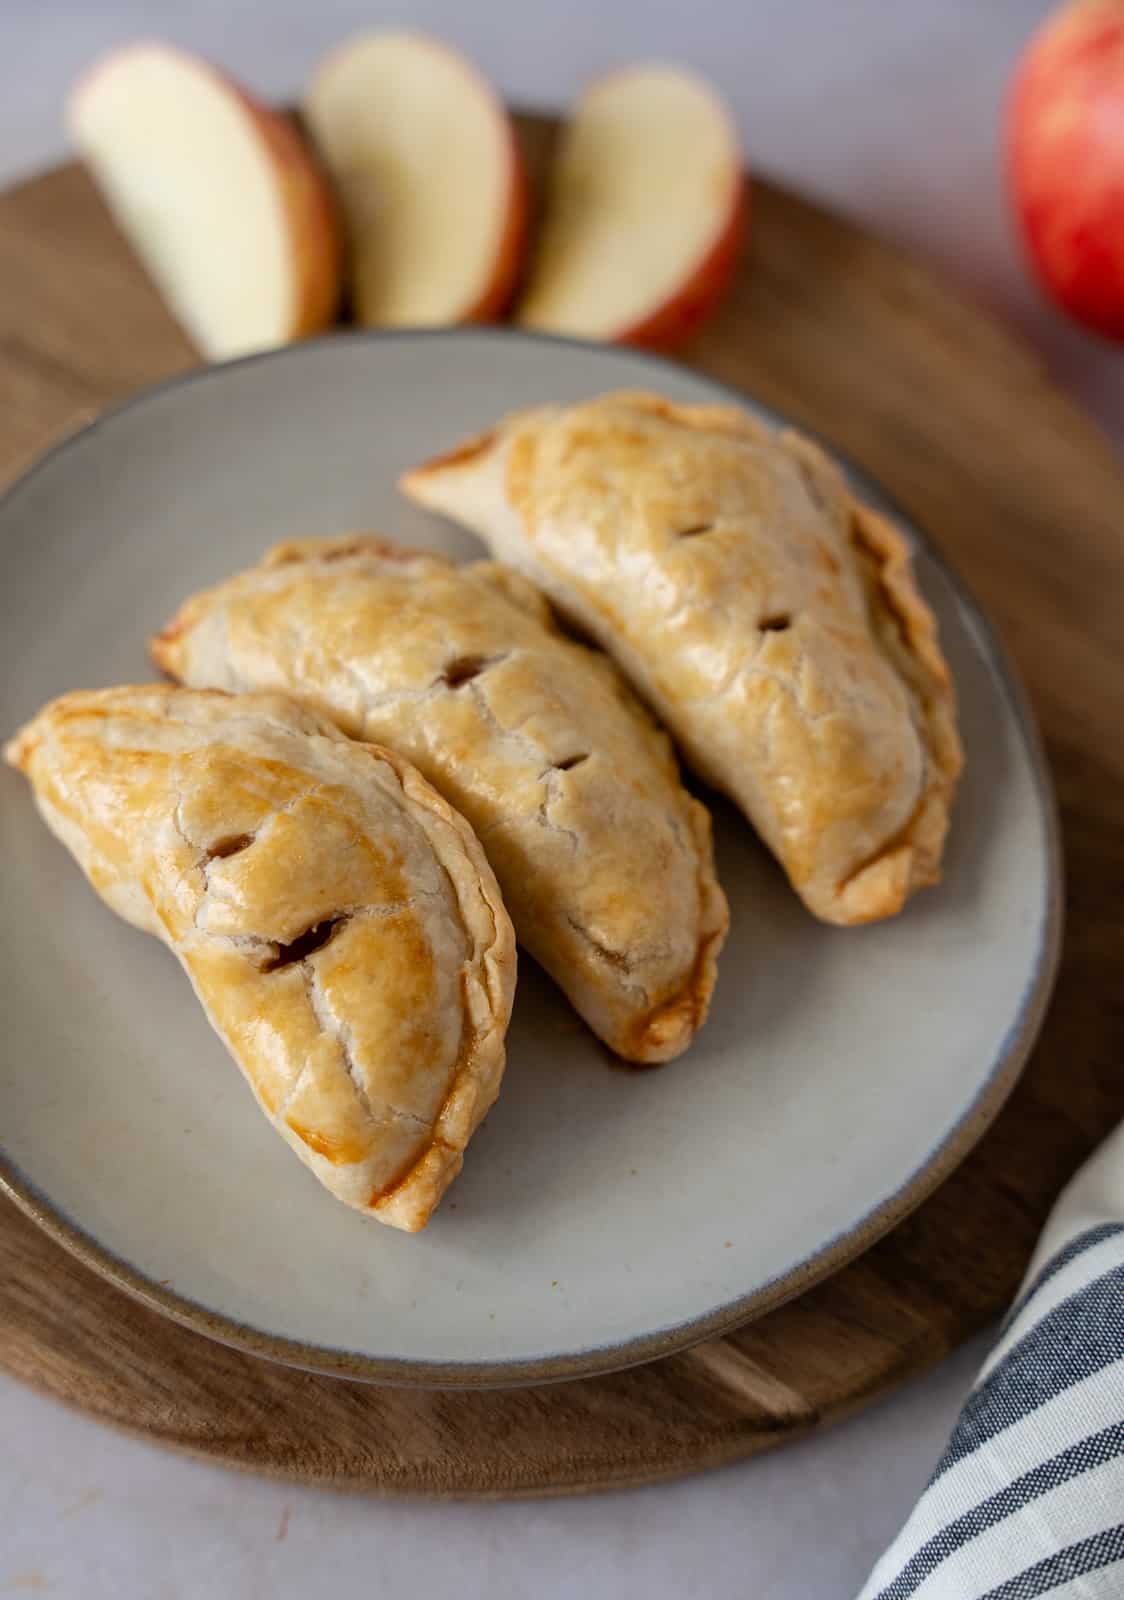 Three baked apple hand pies on a grey plate.